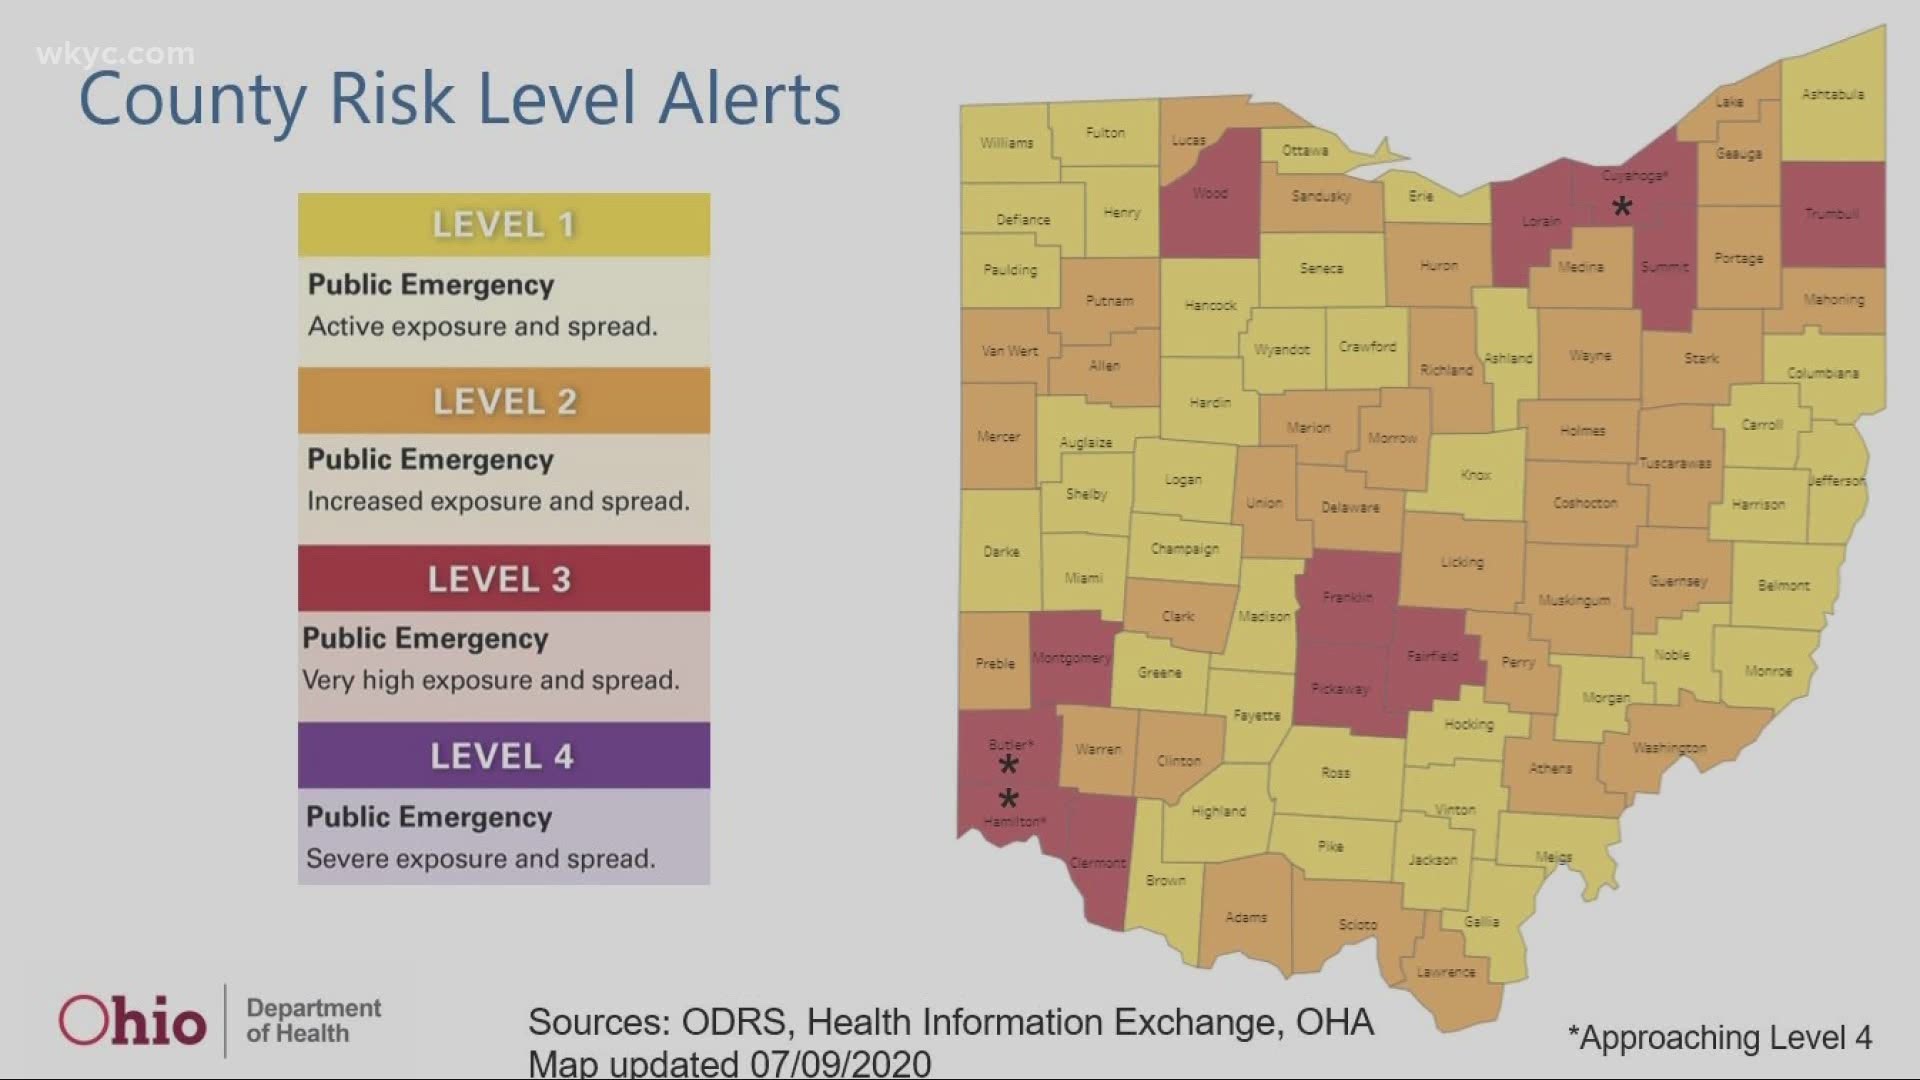 Gov. Mike DeWine shared an updated map showing each county's current risk level amid the coronavirus pandemic. Rachel Polansky reports.